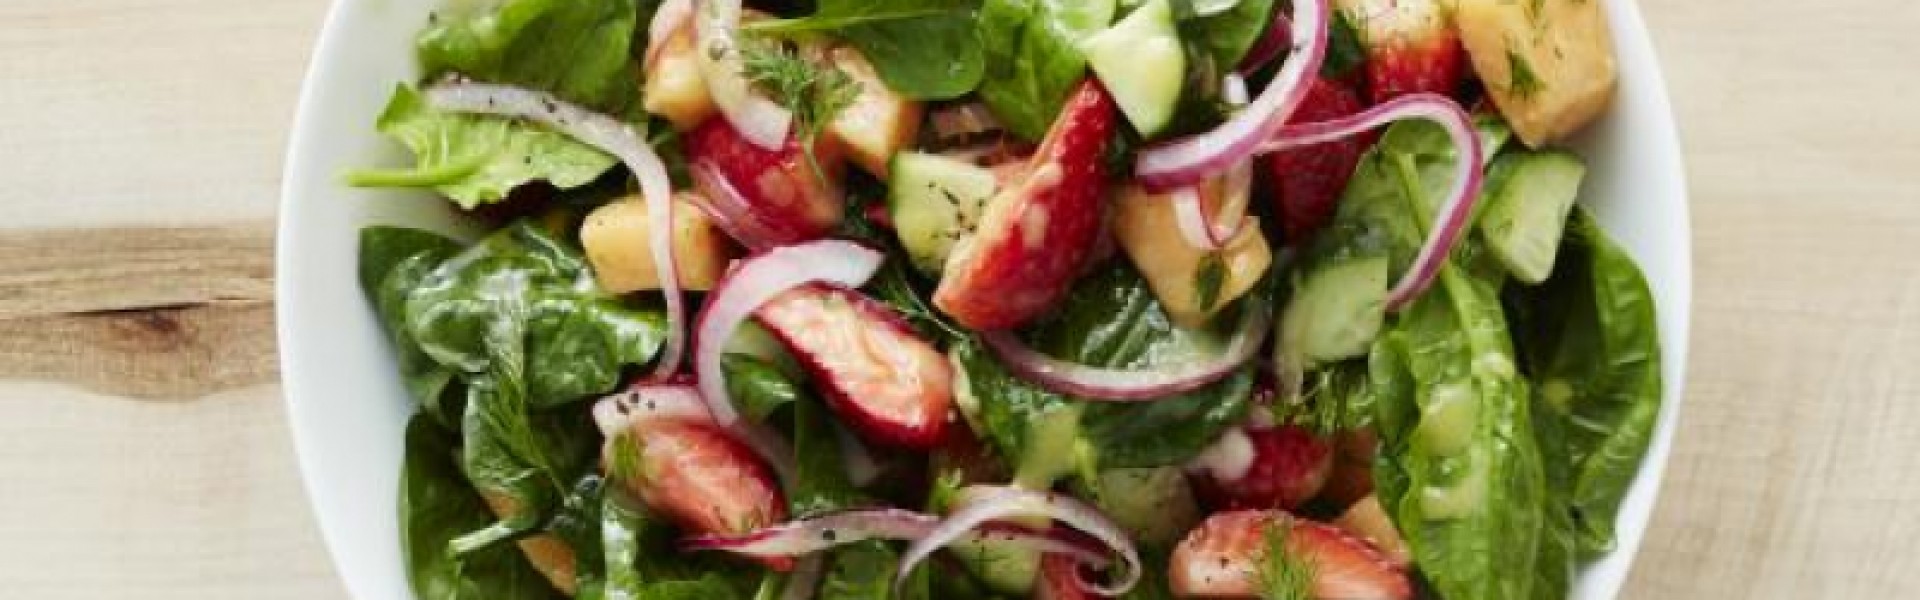 Strawberry, Cucumber and Melon Salad